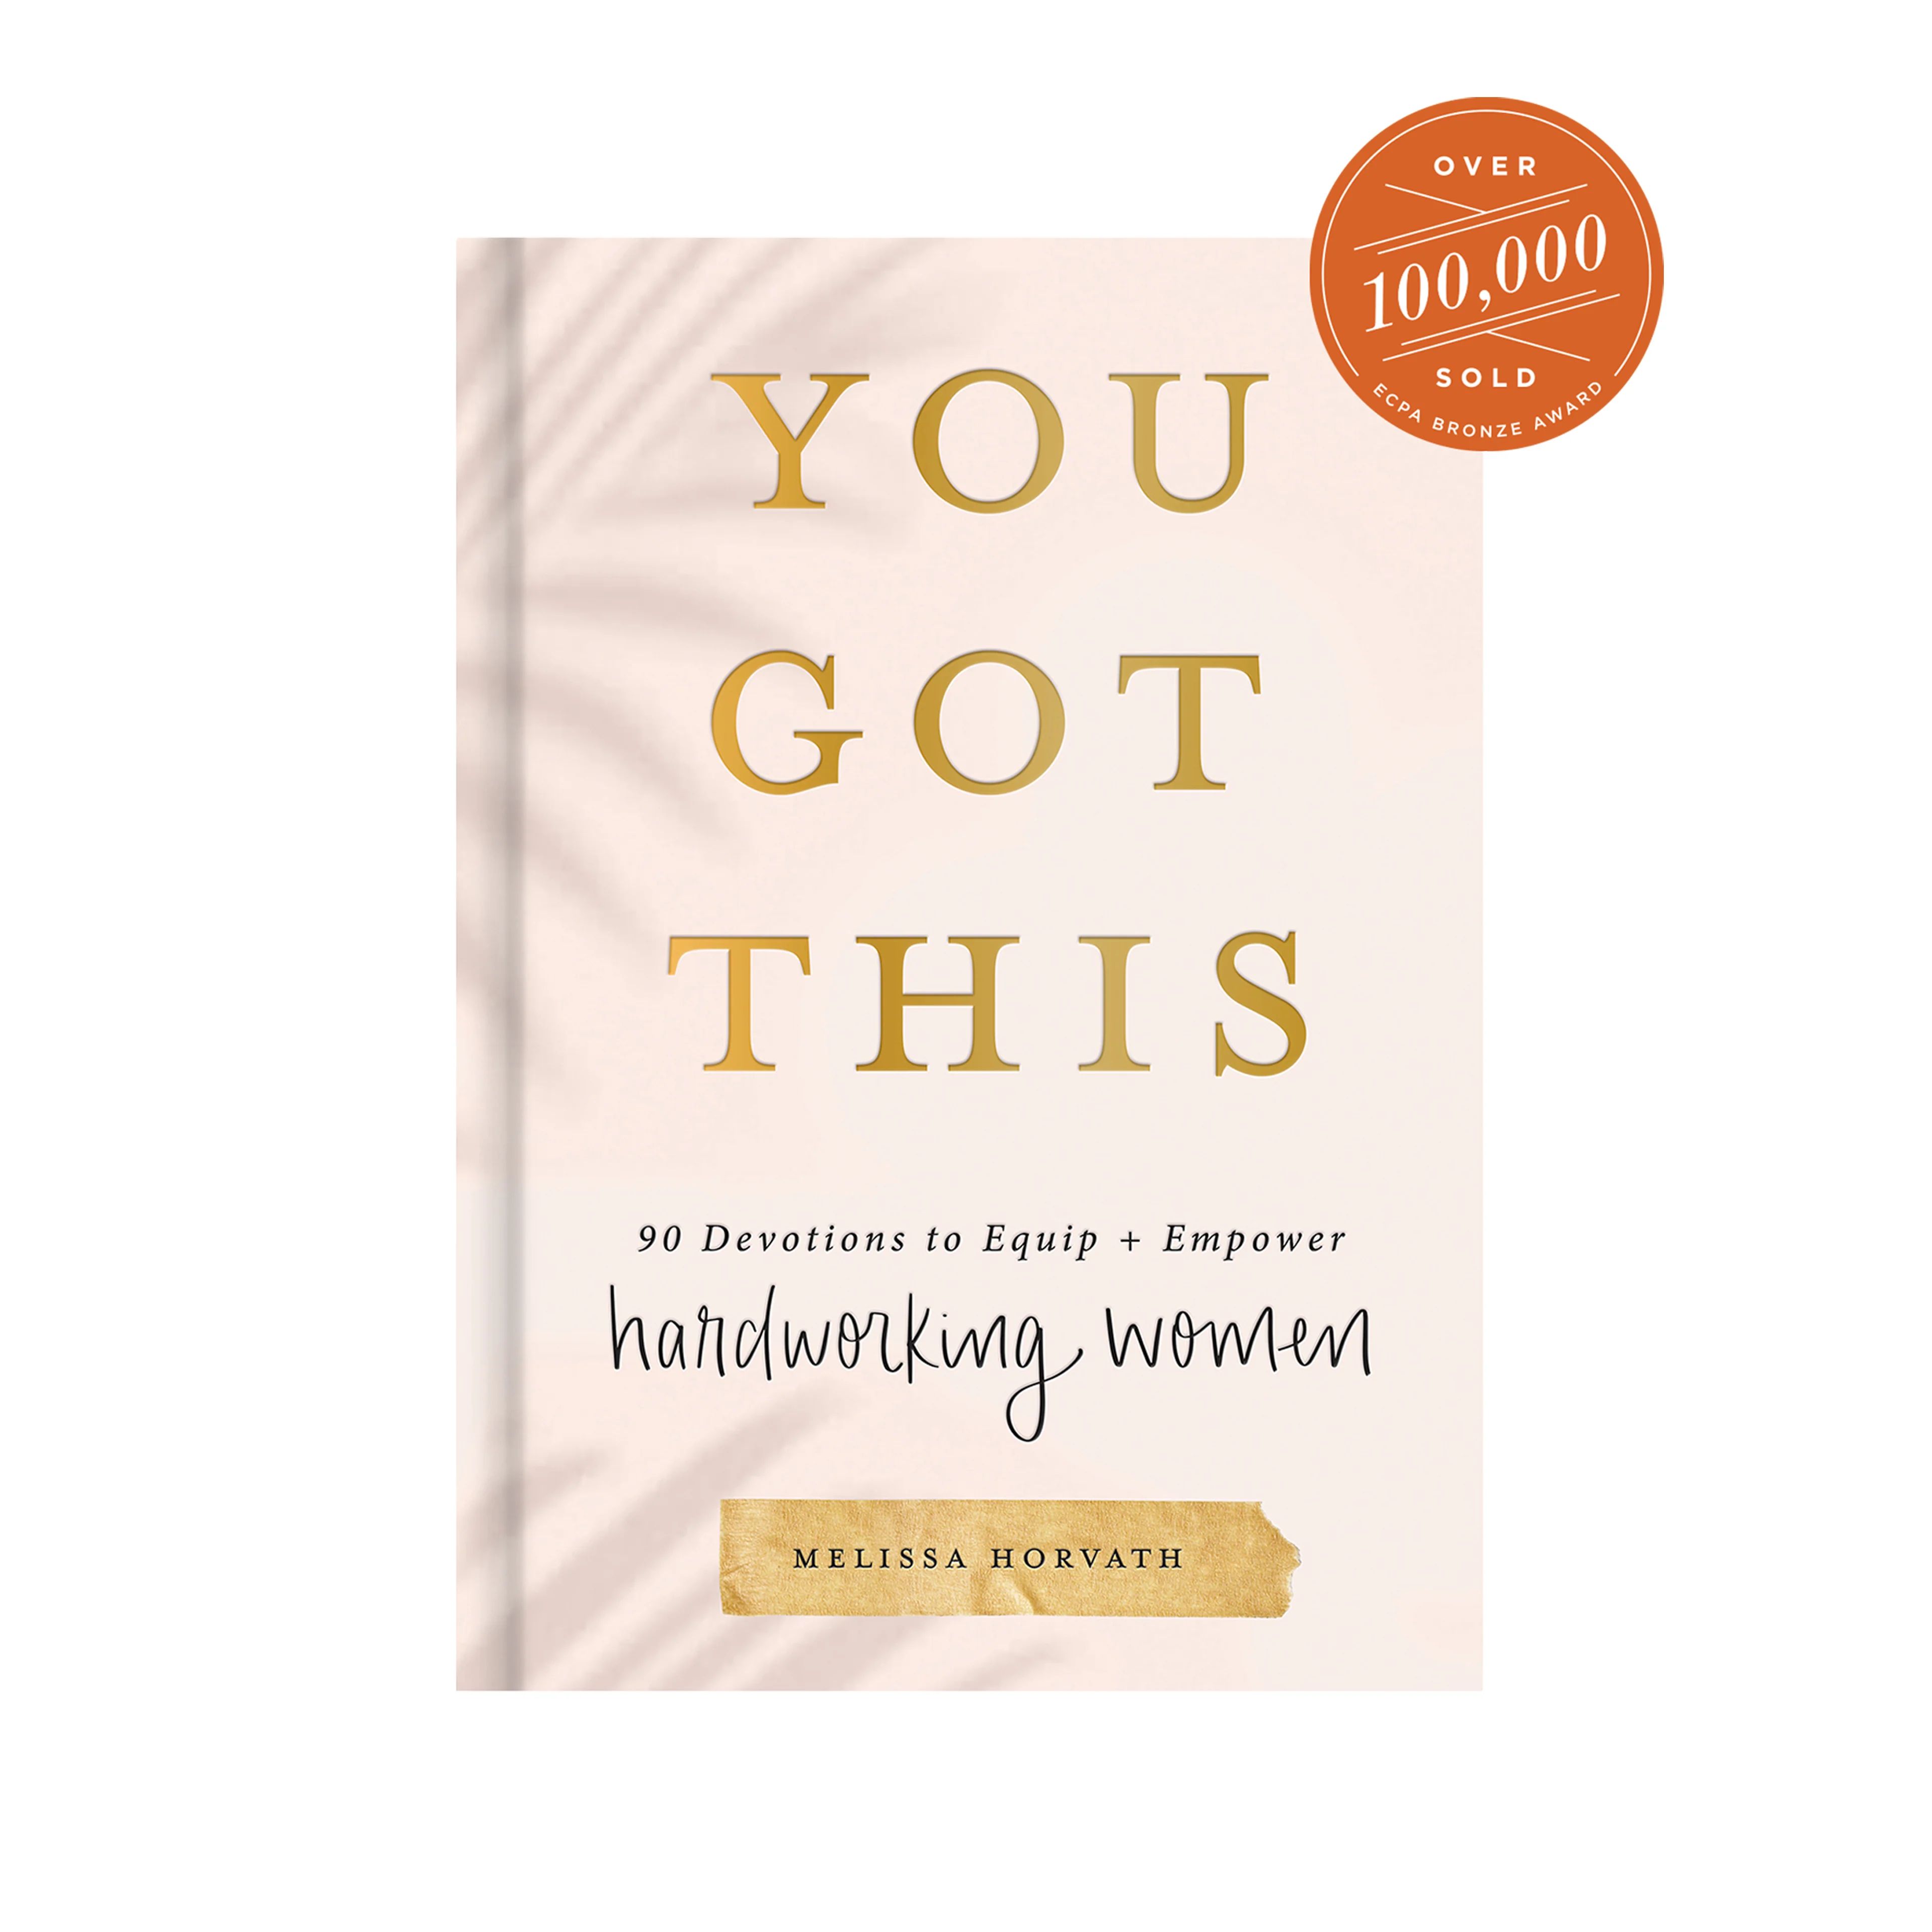 You Got This: 90 Devotions to Equip and Empower Hardworking Women | Sweet Water Decor, LLC